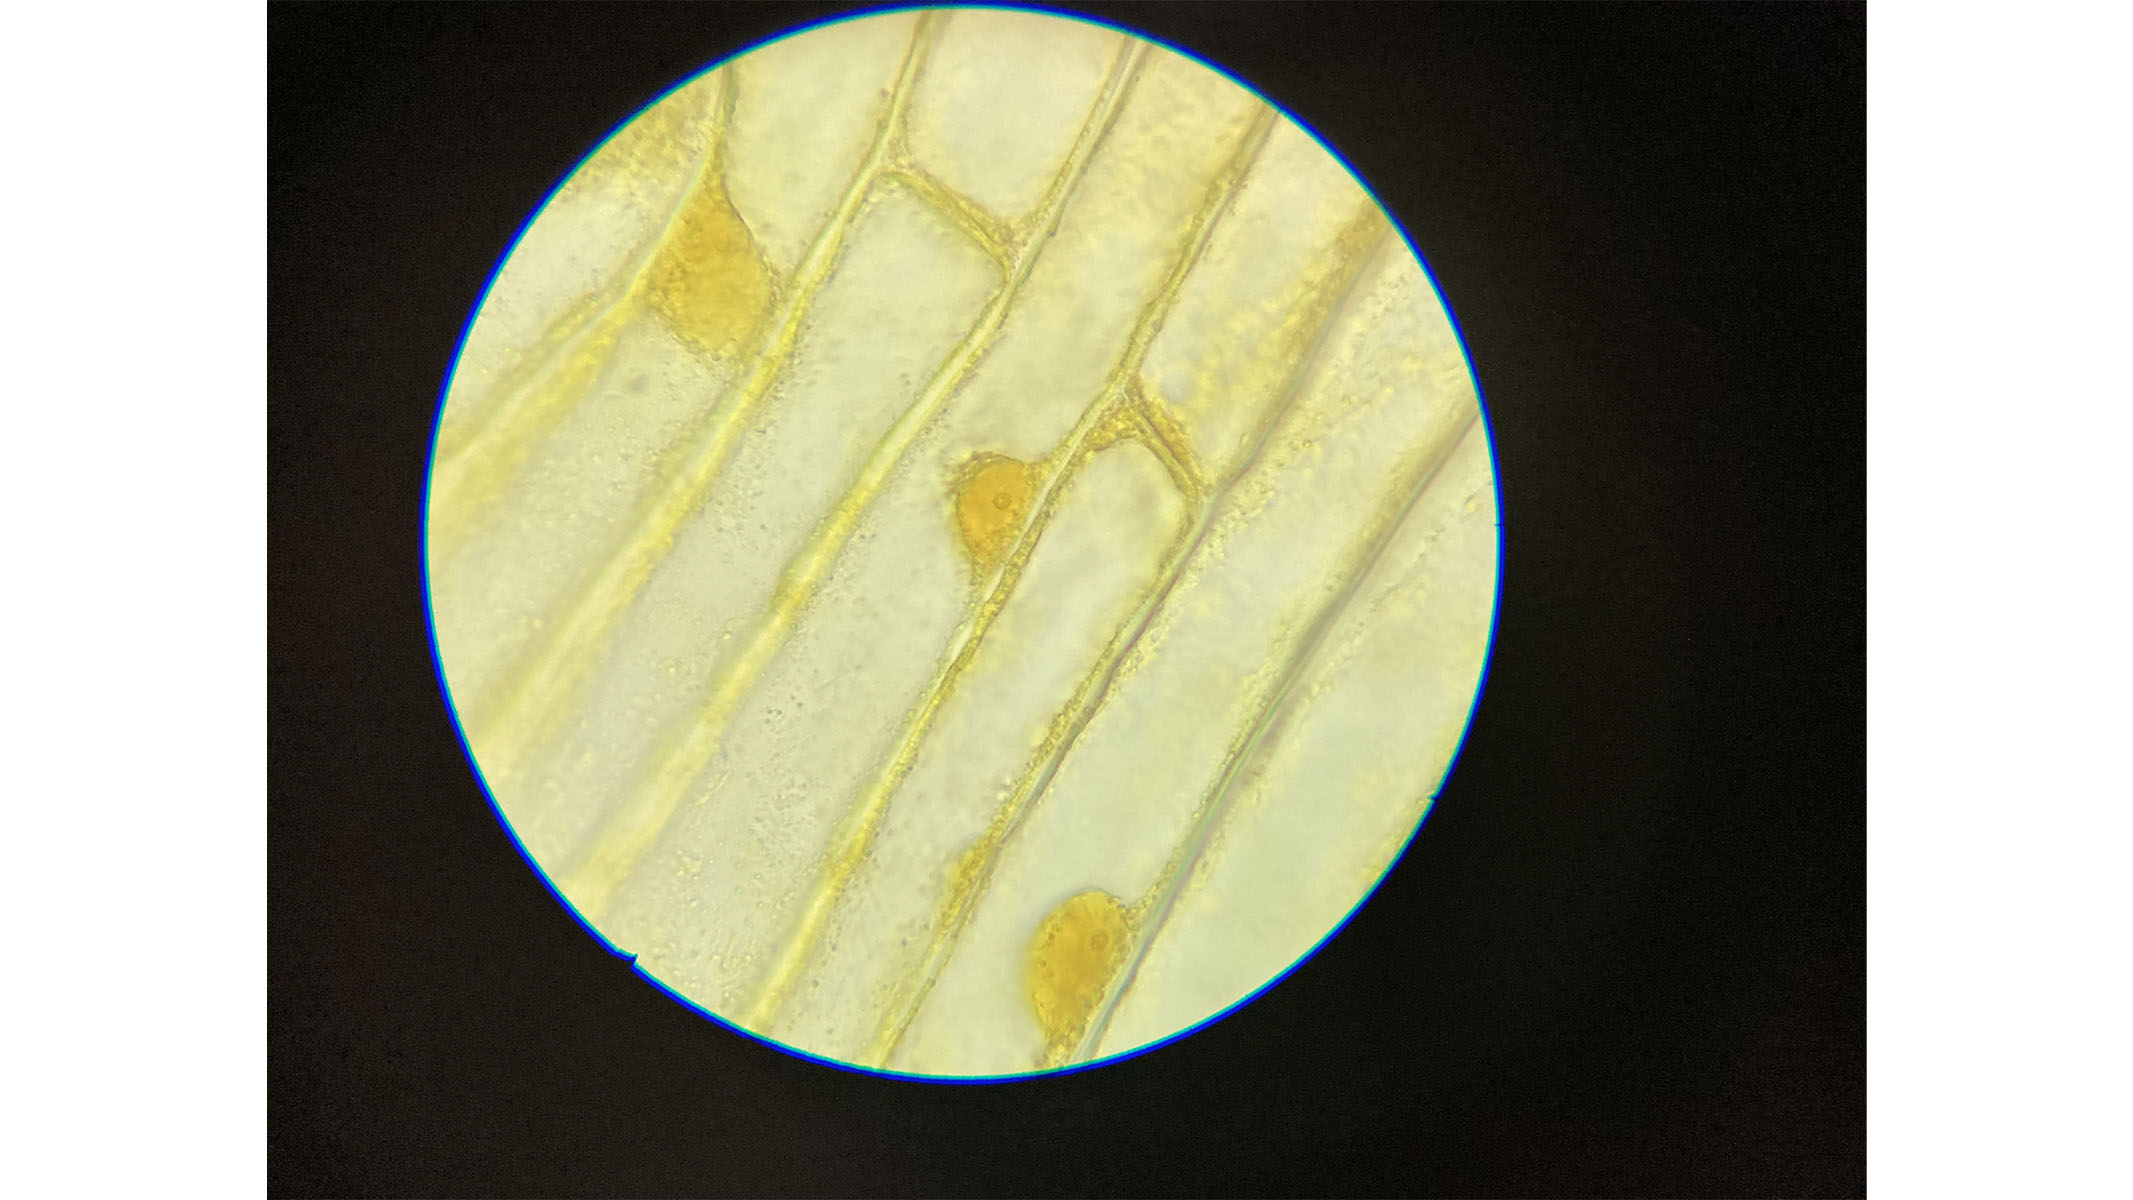 Microscopic image of onion cells